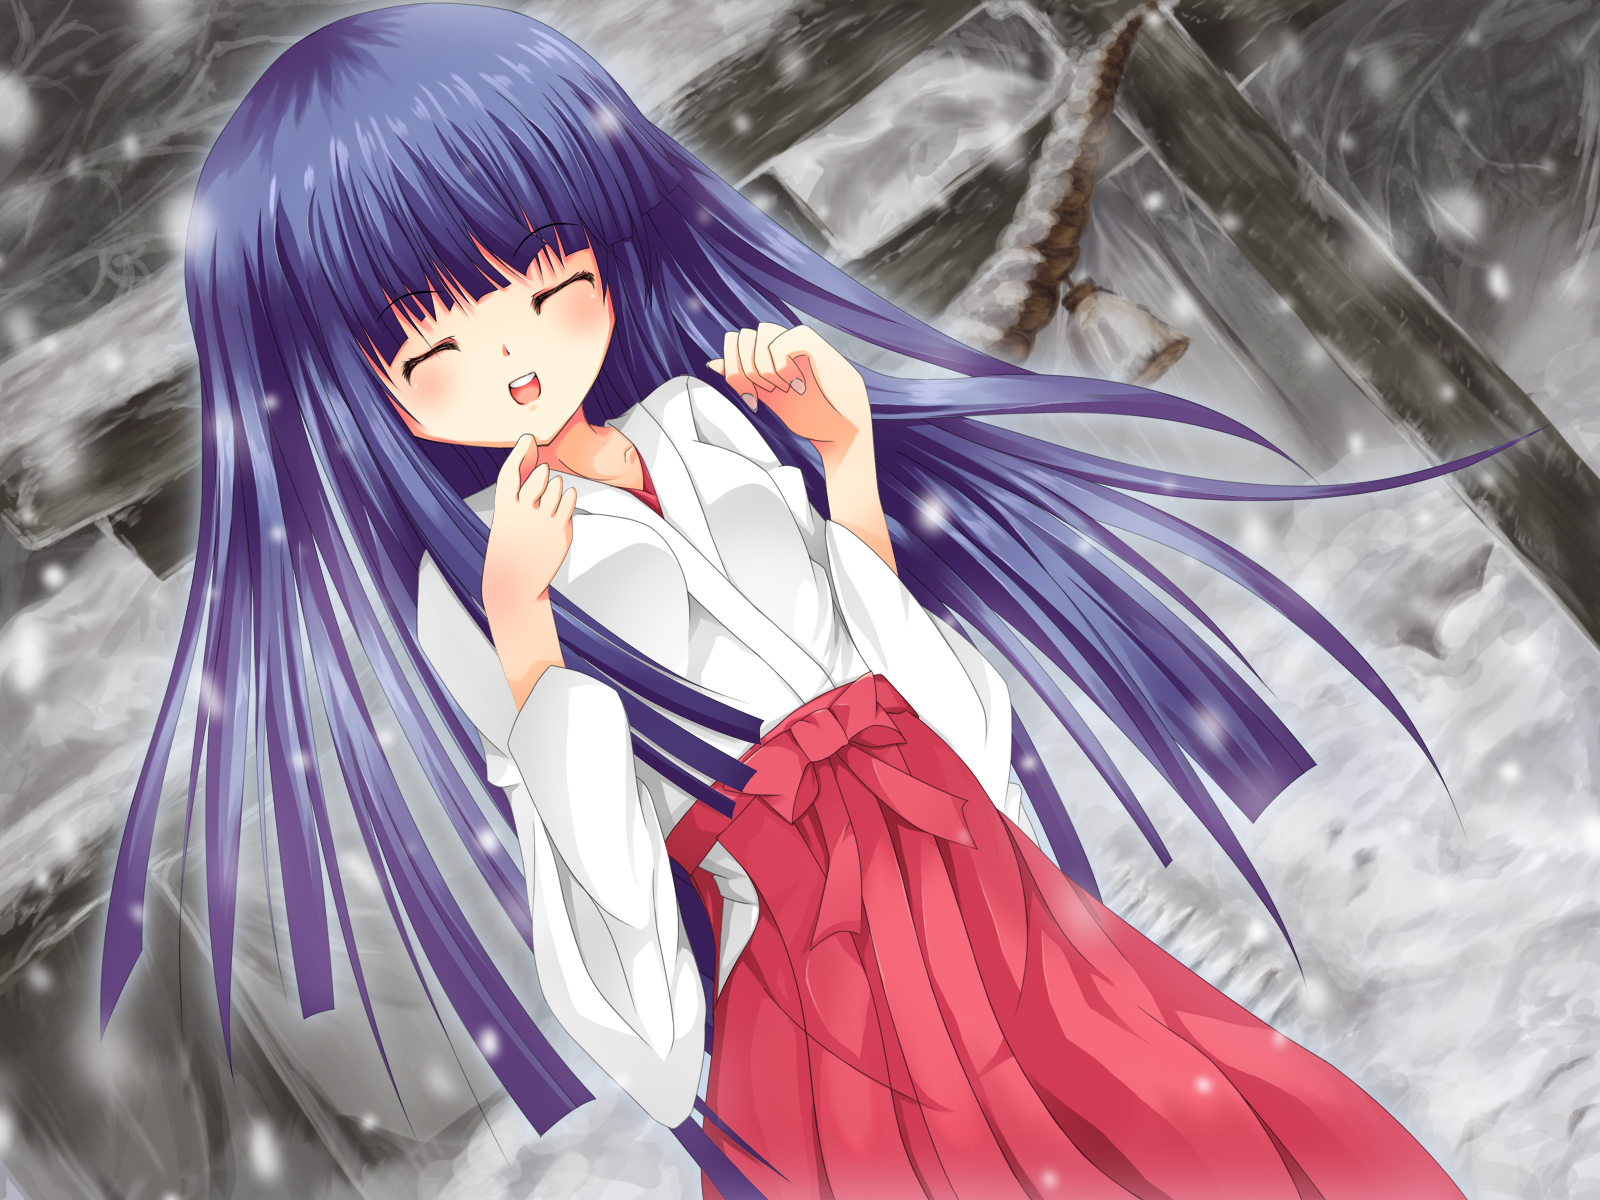 Furude Rika from the anime When They Cry - desktop wallpaper.